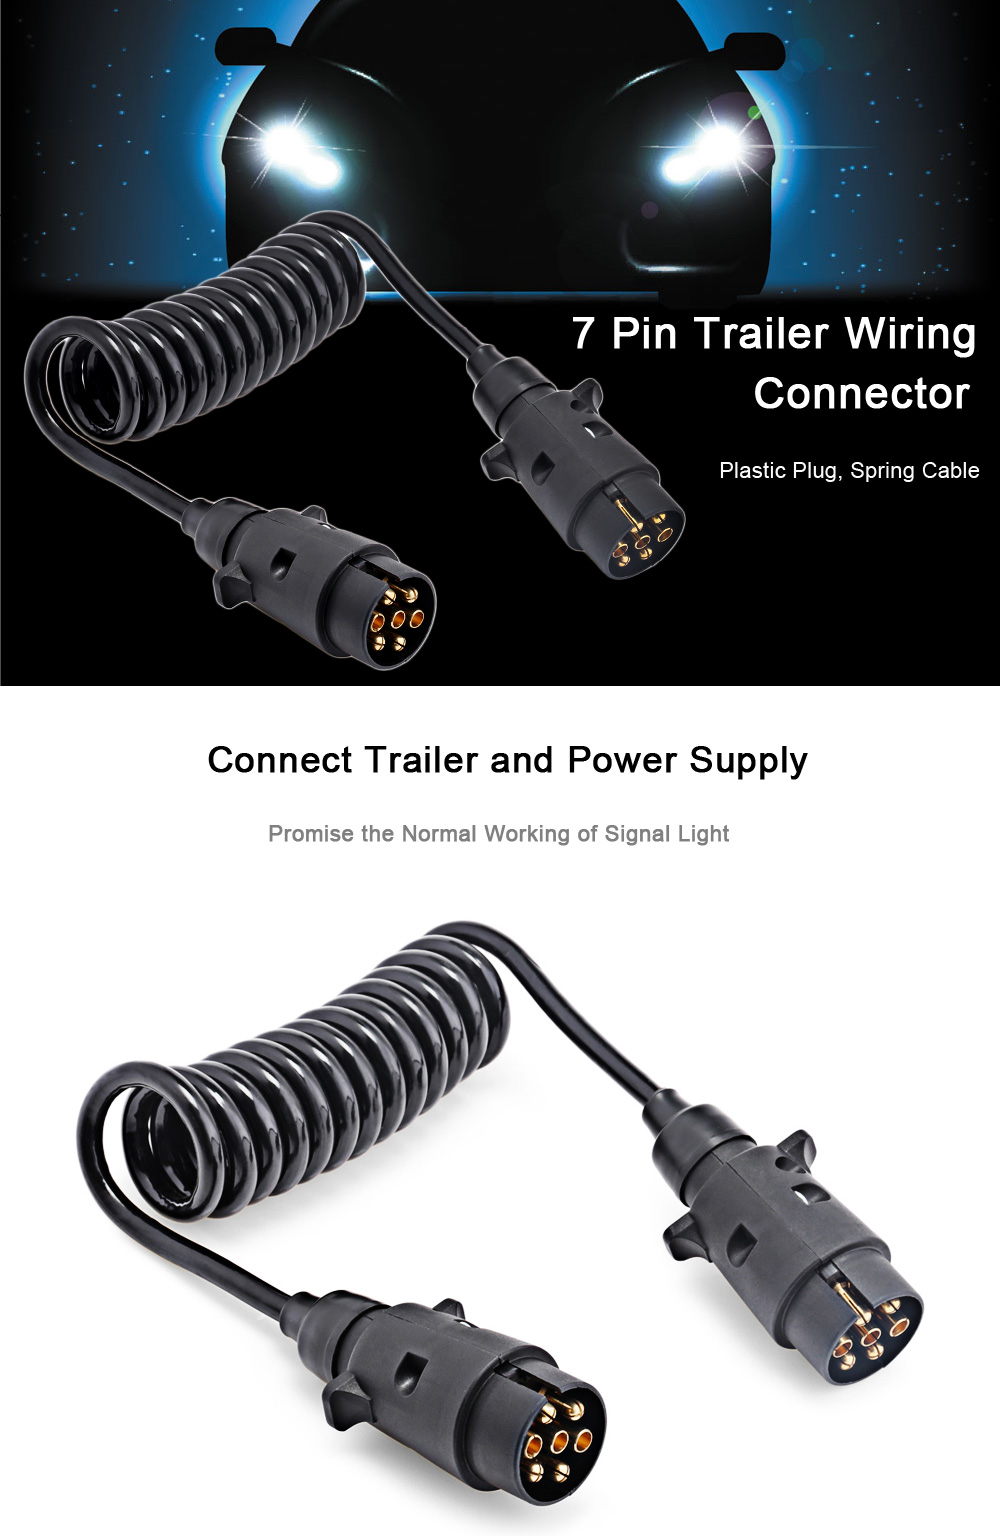 T23489 7 Pin Trailer Wiring Connector N-type Plastic Plug 150CM Spring Cable for European Vehicle